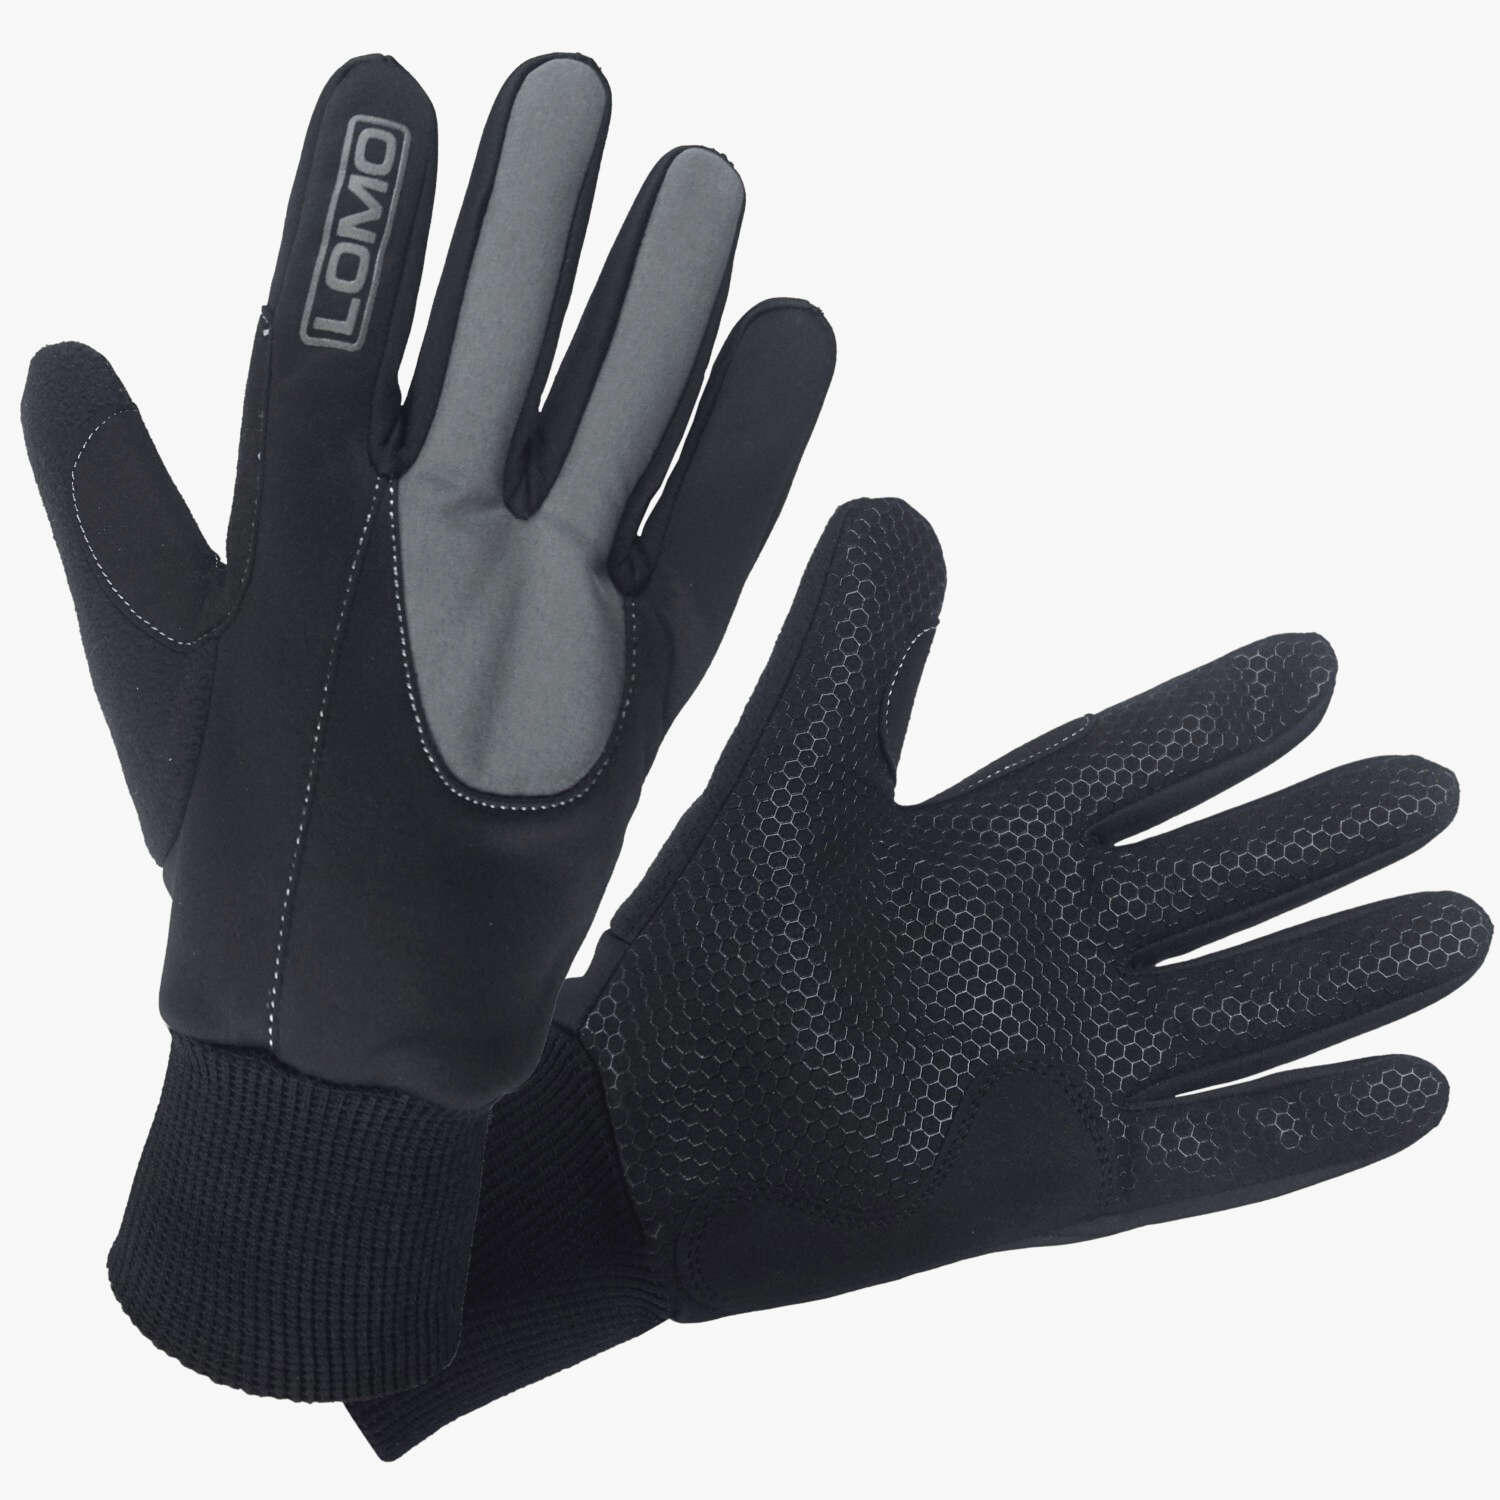 Lomo Winter Cycling Gloves 1/7